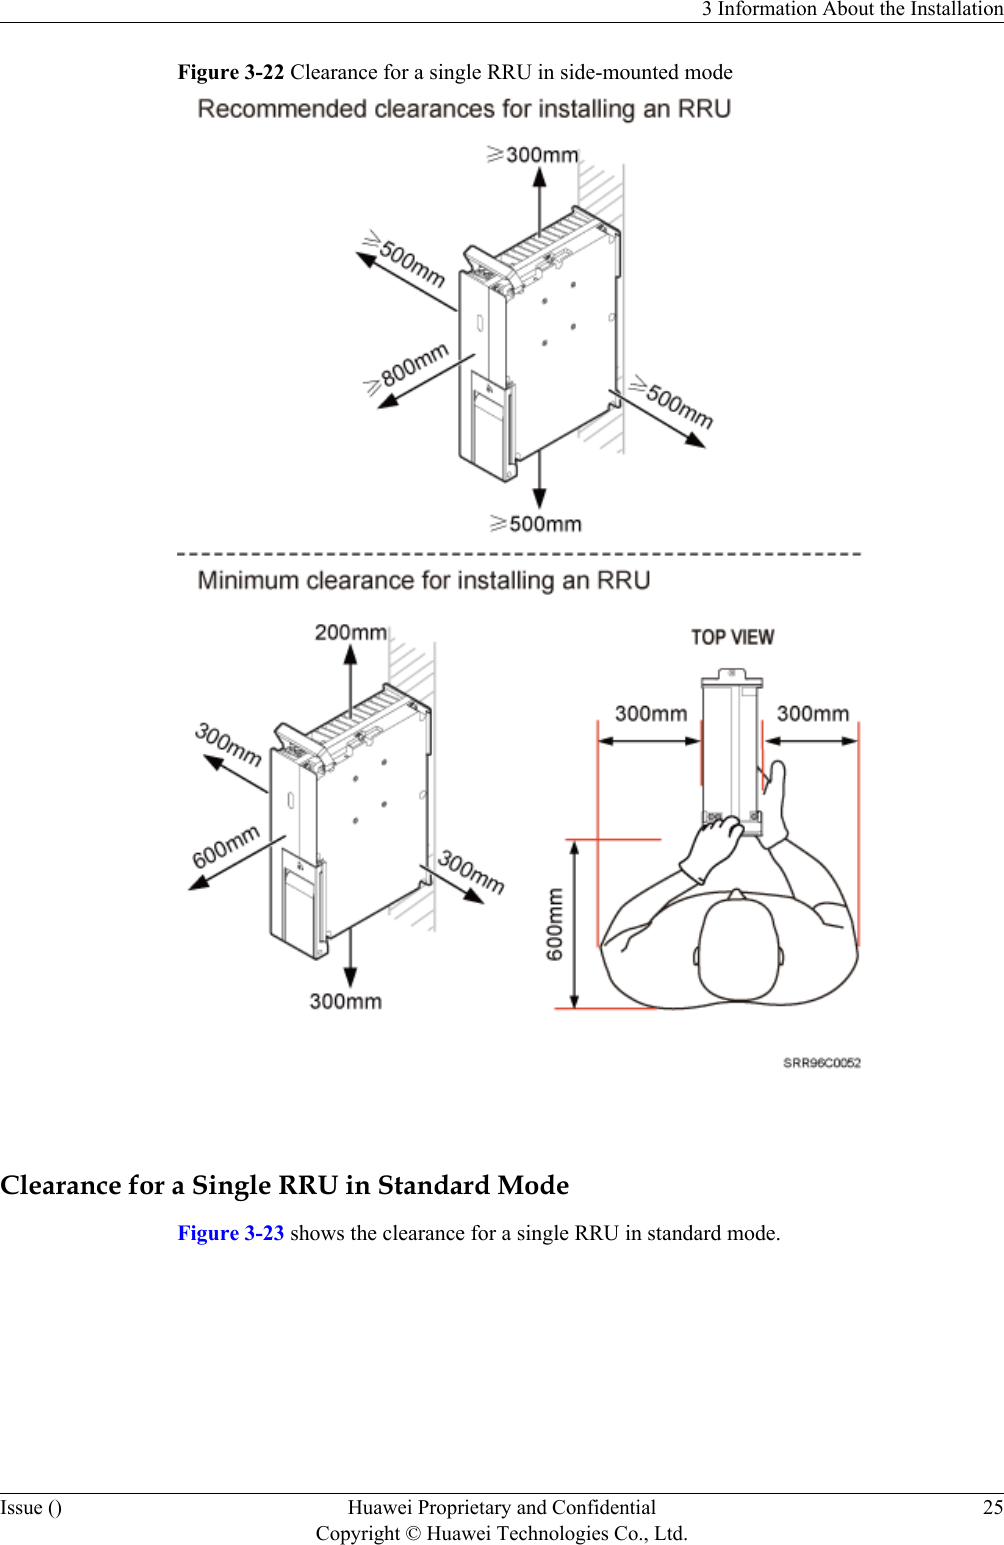 Figure 3-22 Clearance for a single RRU in side-mounted mode Clearance for a Single RRU in Standard ModeFigure 3-23 shows the clearance for a single RRU in standard mode.3 Information About the InstallationIssue () Huawei Proprietary and ConfidentialCopyright © Huawei Technologies Co., Ltd.25